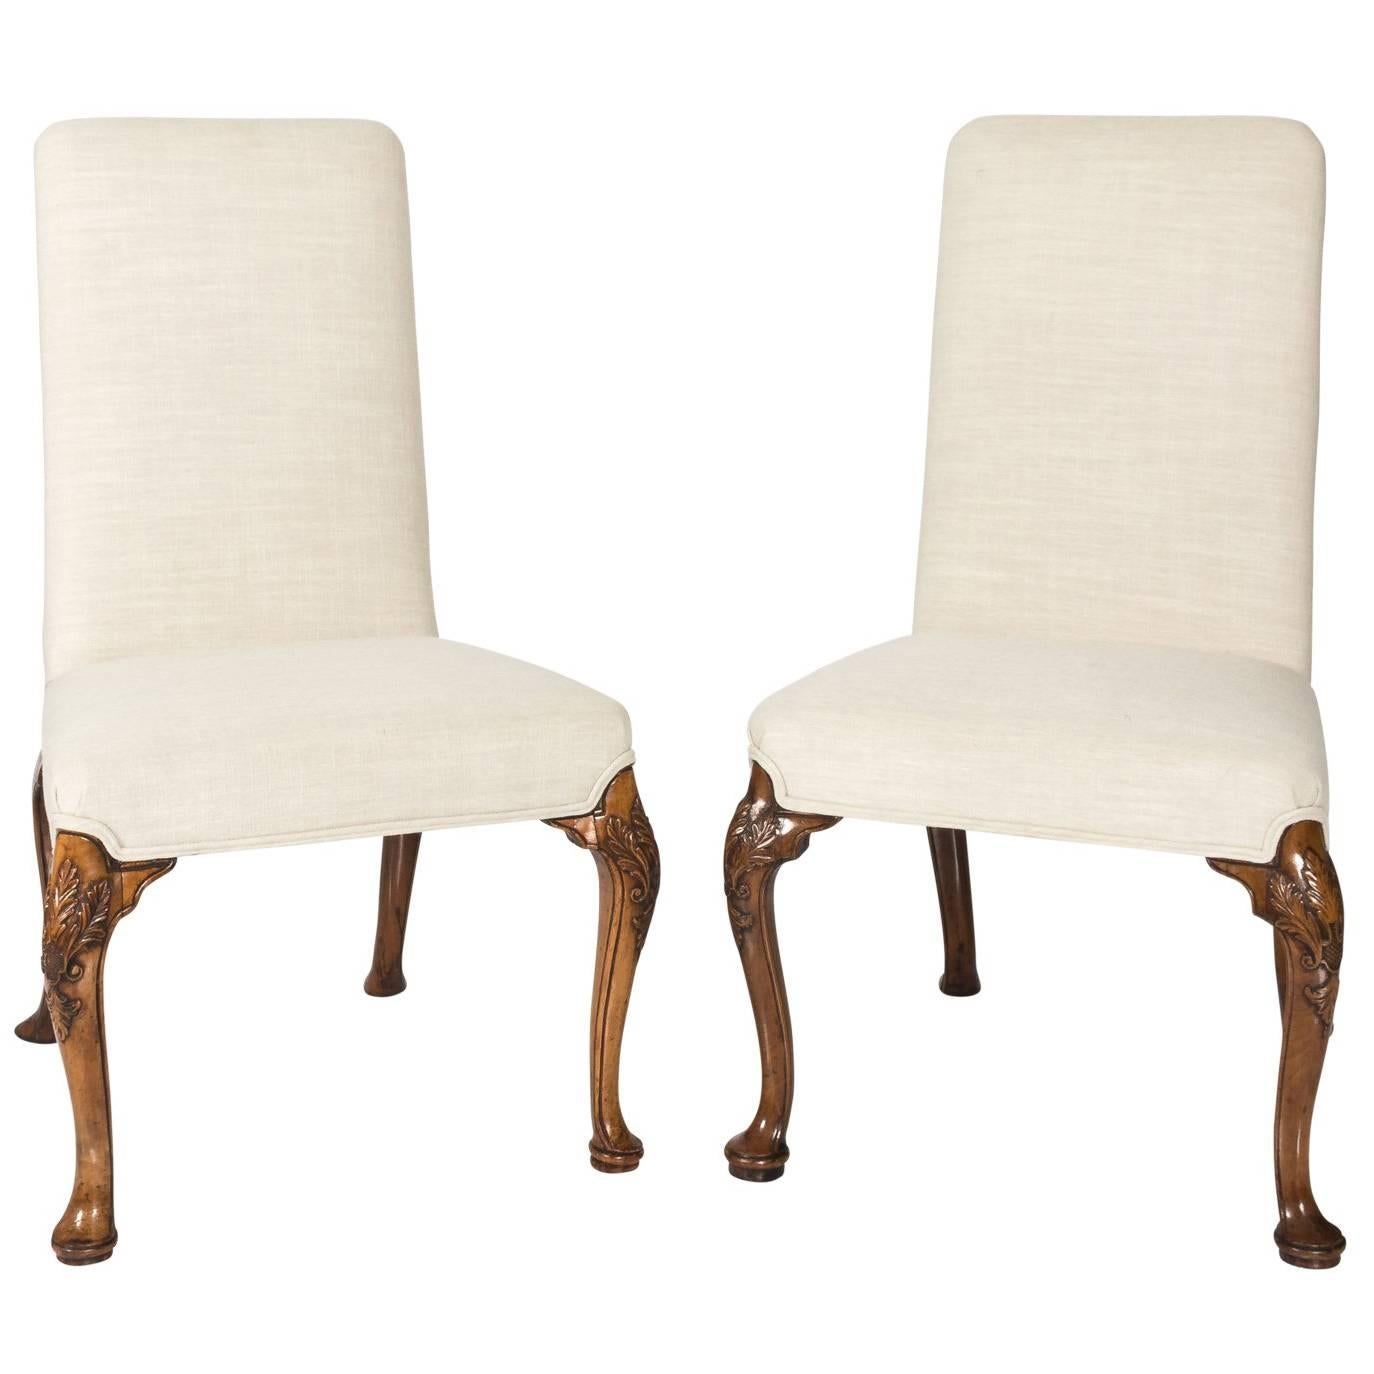 Pair of 18th Century Queen Ann Style Side Chairs